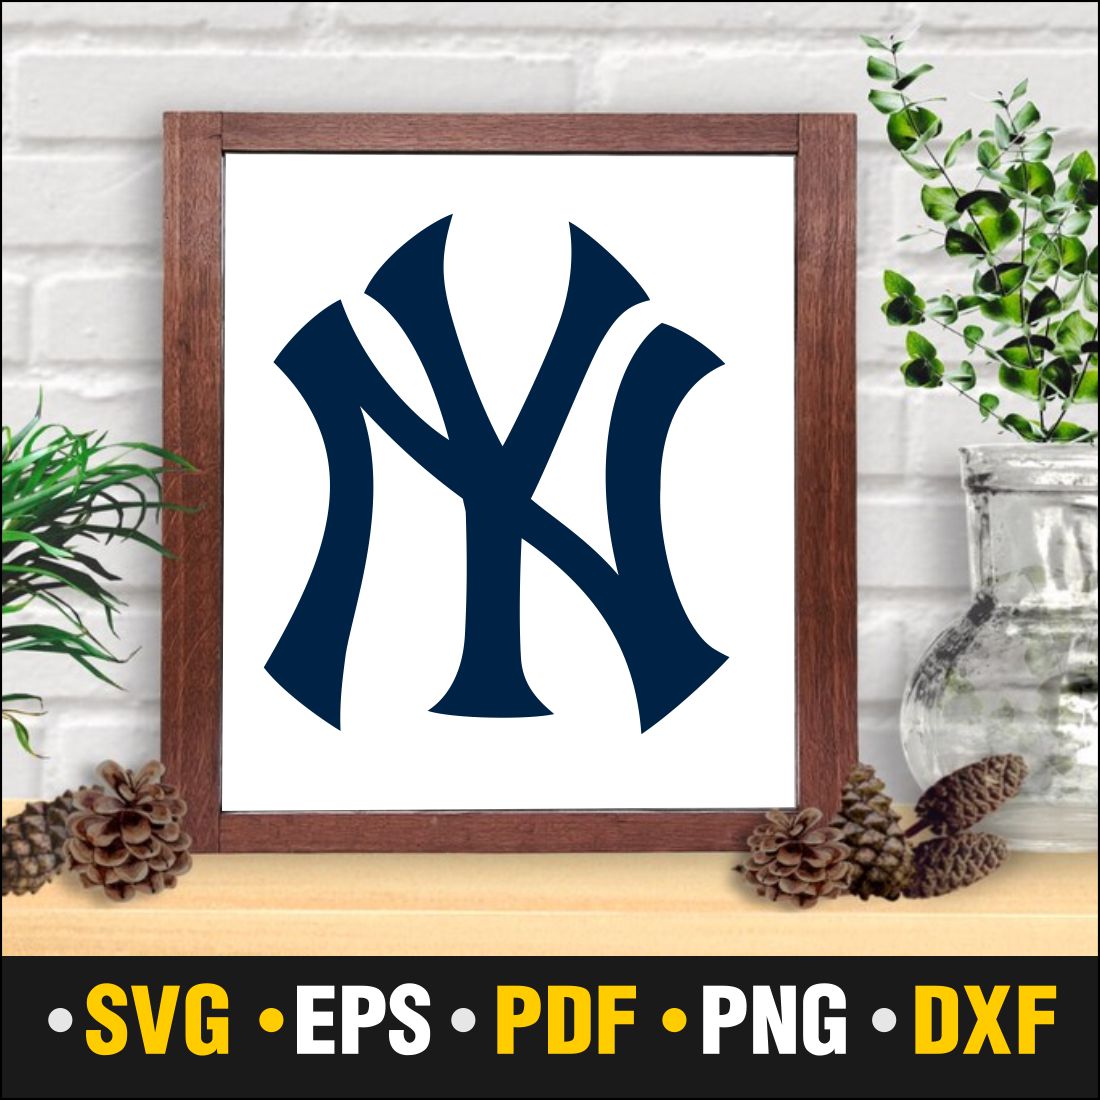 New York Yankees Svg, NY Svg Vector Cut file Cricut, Silhouette, Pdf Png, Dxf, Decal, Sticker, Stencil, Vinyl preview image.